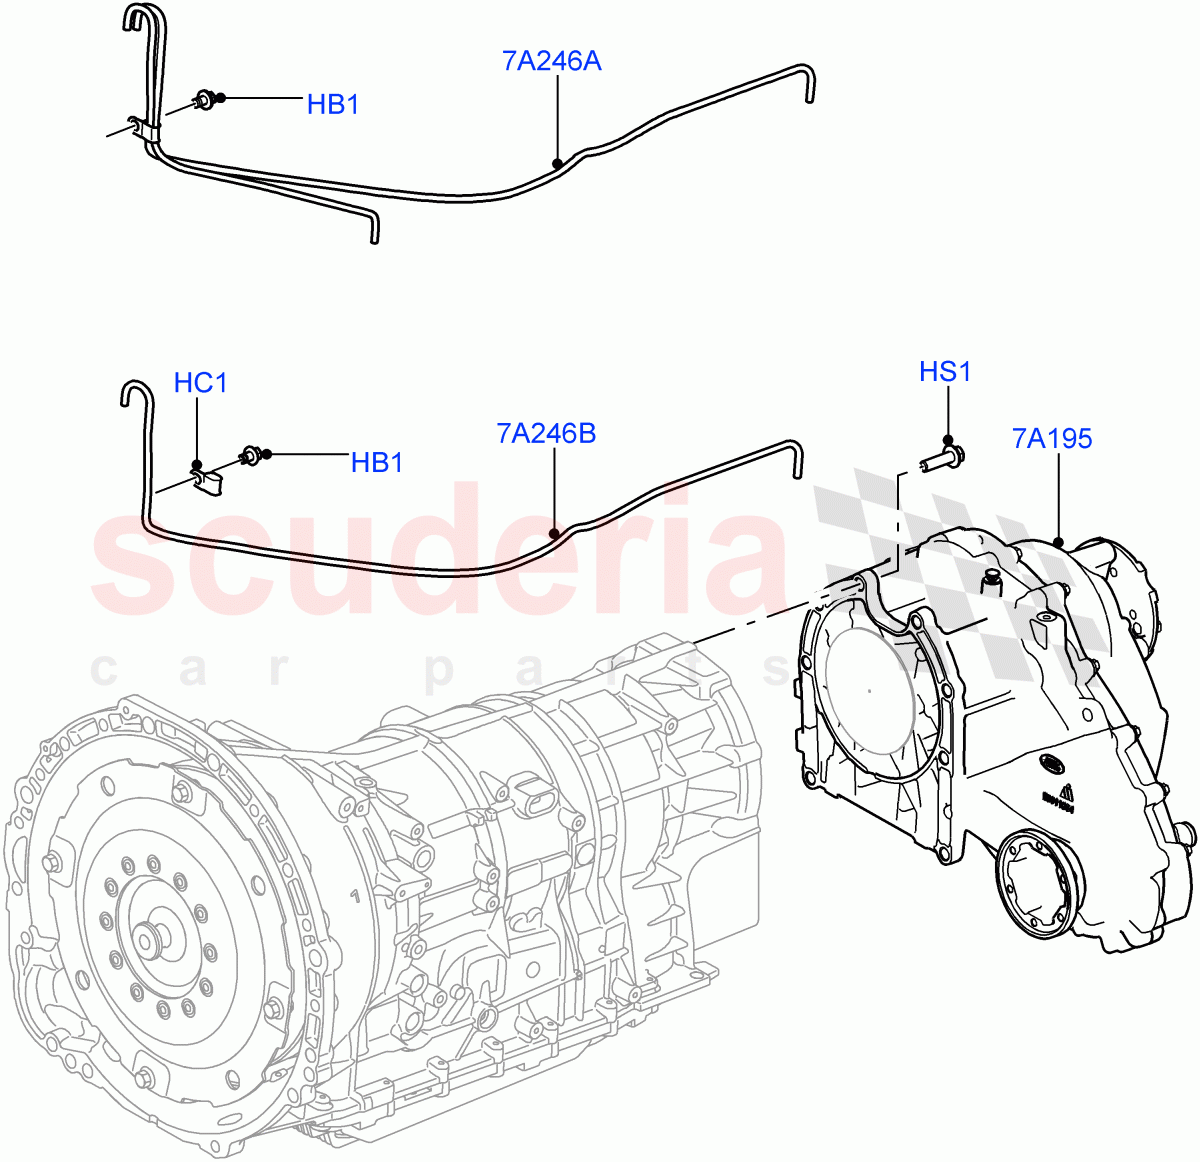 Transfer Drive Case(8 Speed Auto Trans ZF 8HP45,With 1 Speed Transfer Case,8 Speed Auto Trans ZF 8HP70 4WD)((V)FROMEA000001,(V)TOGA999999) of Land Rover Land Rover Range Rover Sport (2014+) [2.0 Turbo Petrol GTDI]